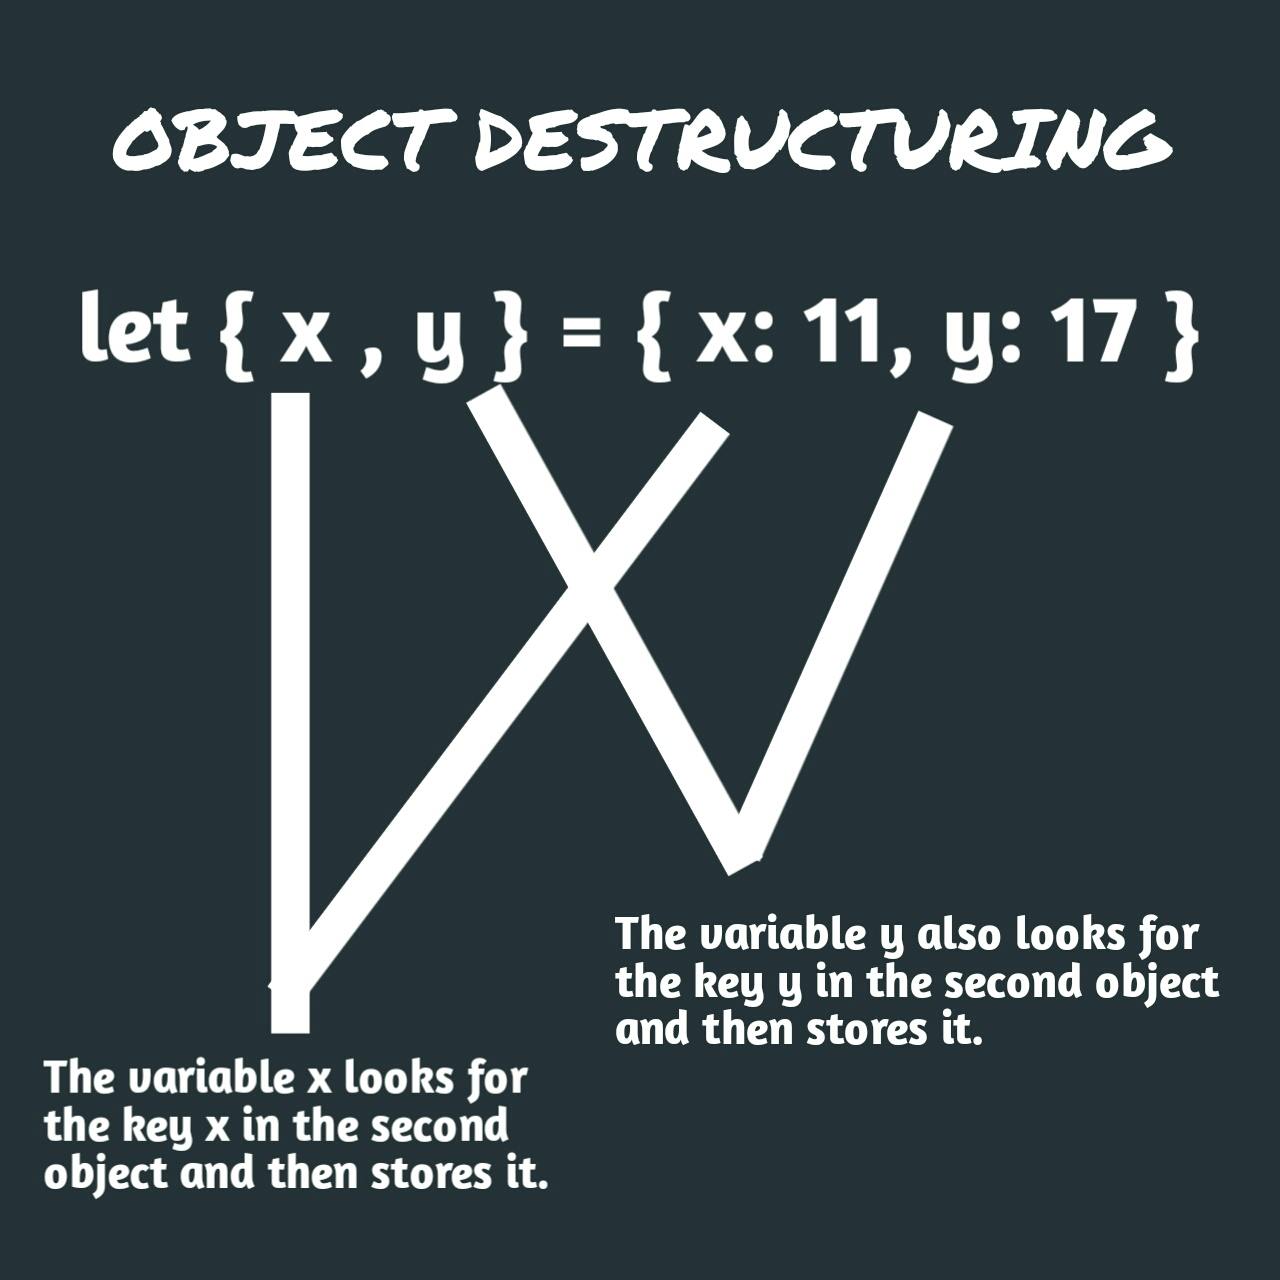 Image illustrating the process of Object destructuring